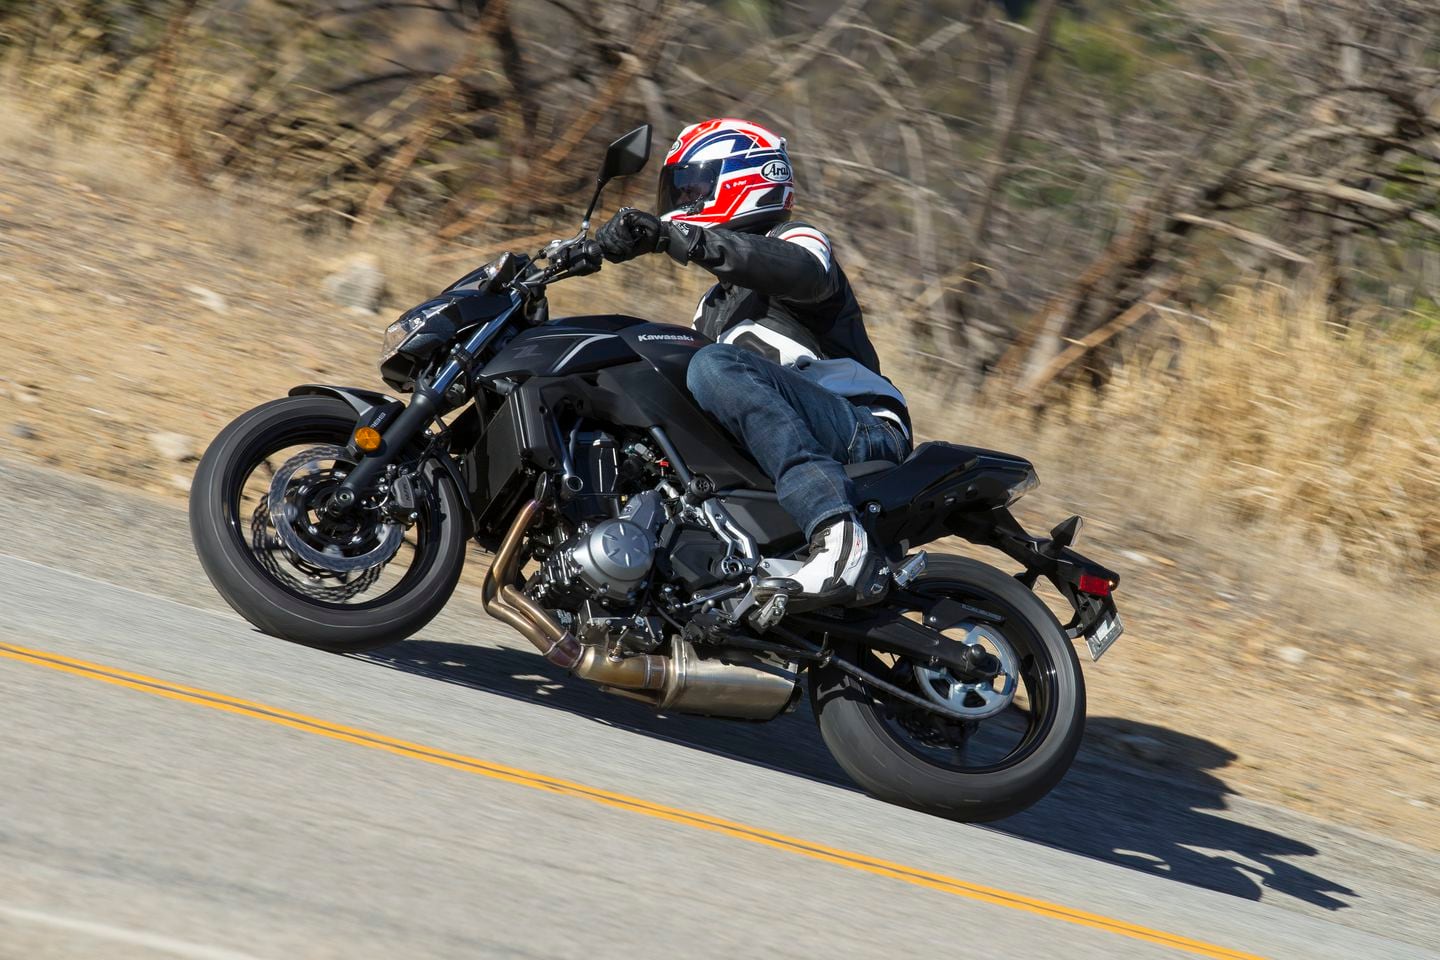 Z650 - FIRST RIDE REVIEW Cycle World